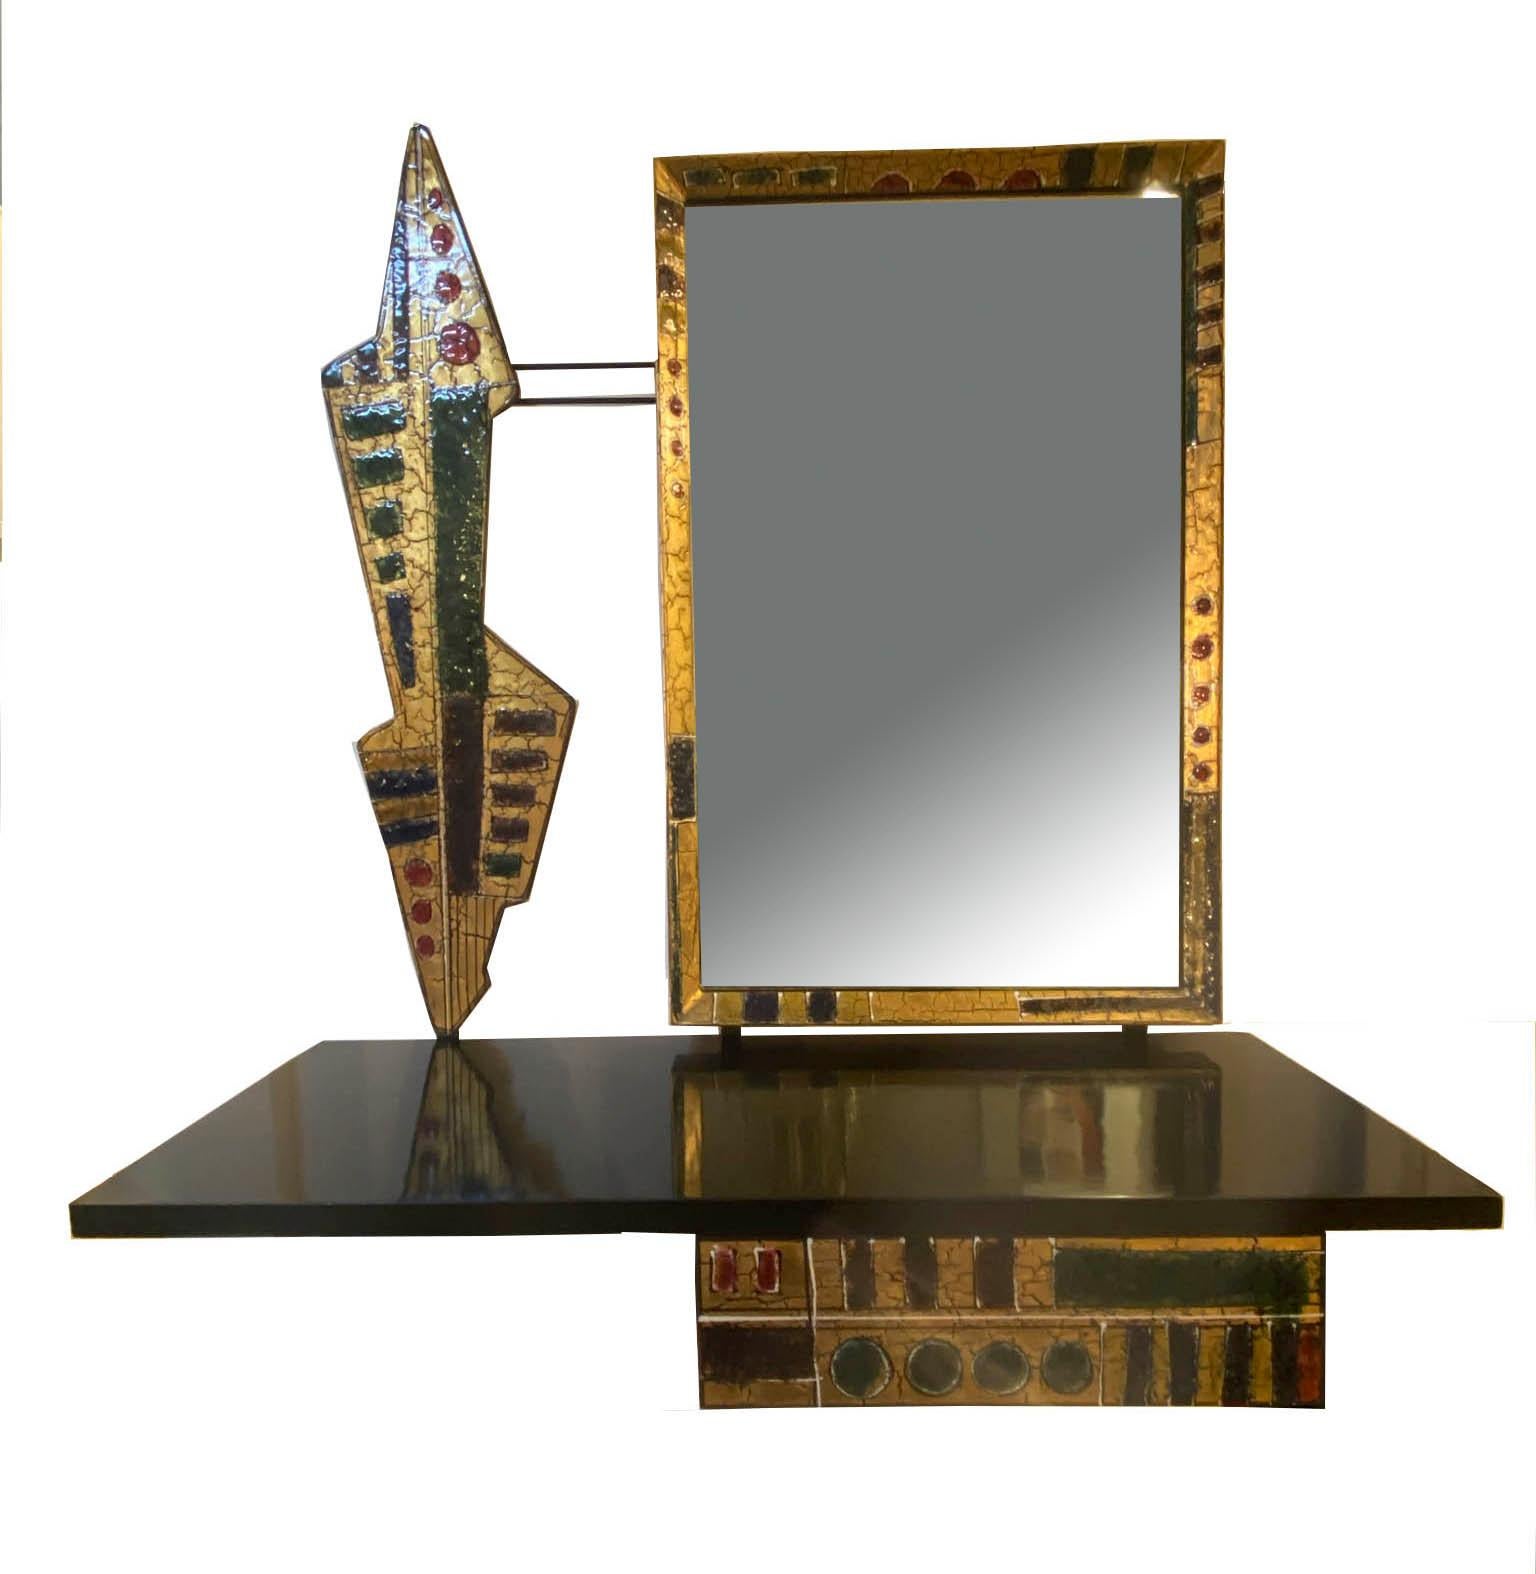 Console or dressing table with mirror, drawer and decorative elements of exquisite workmanship and extremely rare.
The shelf is glossy lacquered black, the decorations with rounded and abstract multi-color shapes are in hammered copper with an